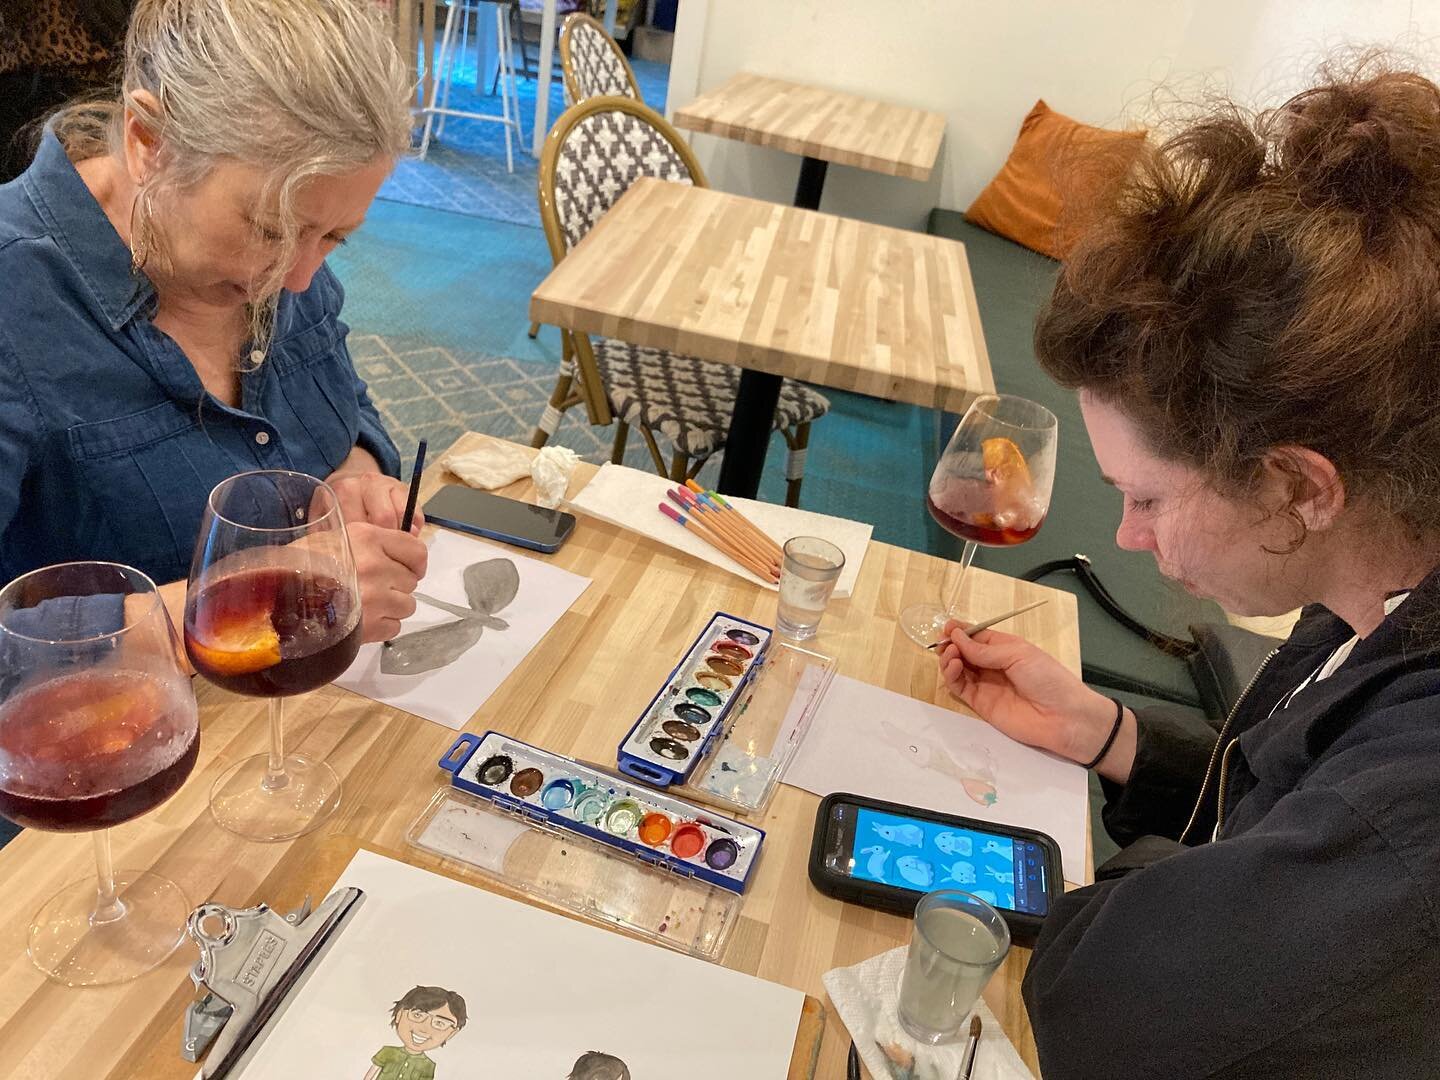 Watercolor night with the fam (@1stchoiceorganizers and @shayebebaby ) at @superbloom.sav 
Working on some concepts 😎

The awesome crab sticker on my water bottle in the 2nd photo, you ask? Courtesy of the talented @sanfordarts_ 

#wineandwatercolor